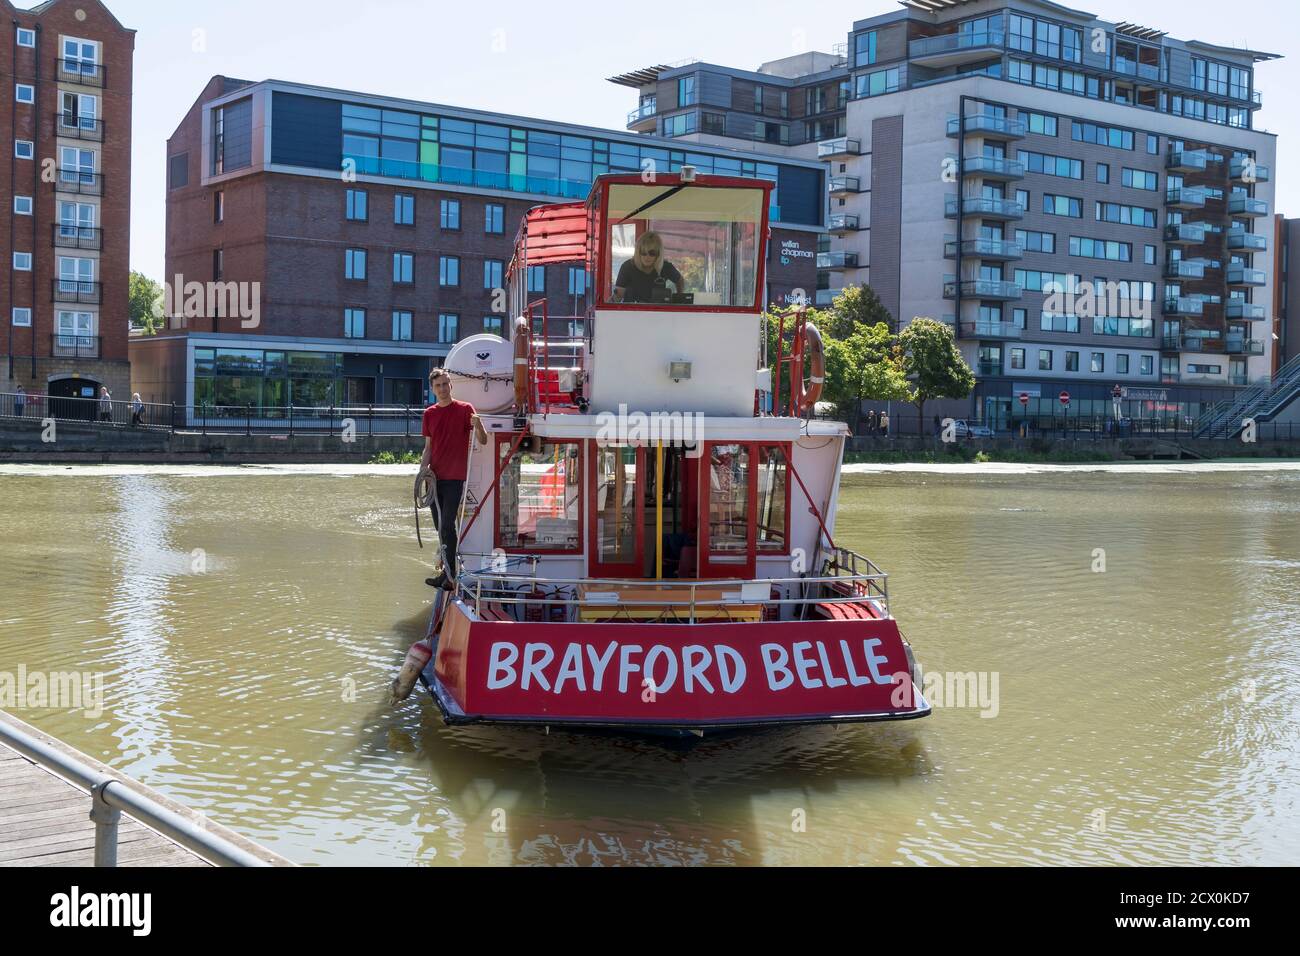 Brayford Belle for public cruising trips on the Brayford Pool approaching the landing stage Lincoln city August 2020 Stock Photo